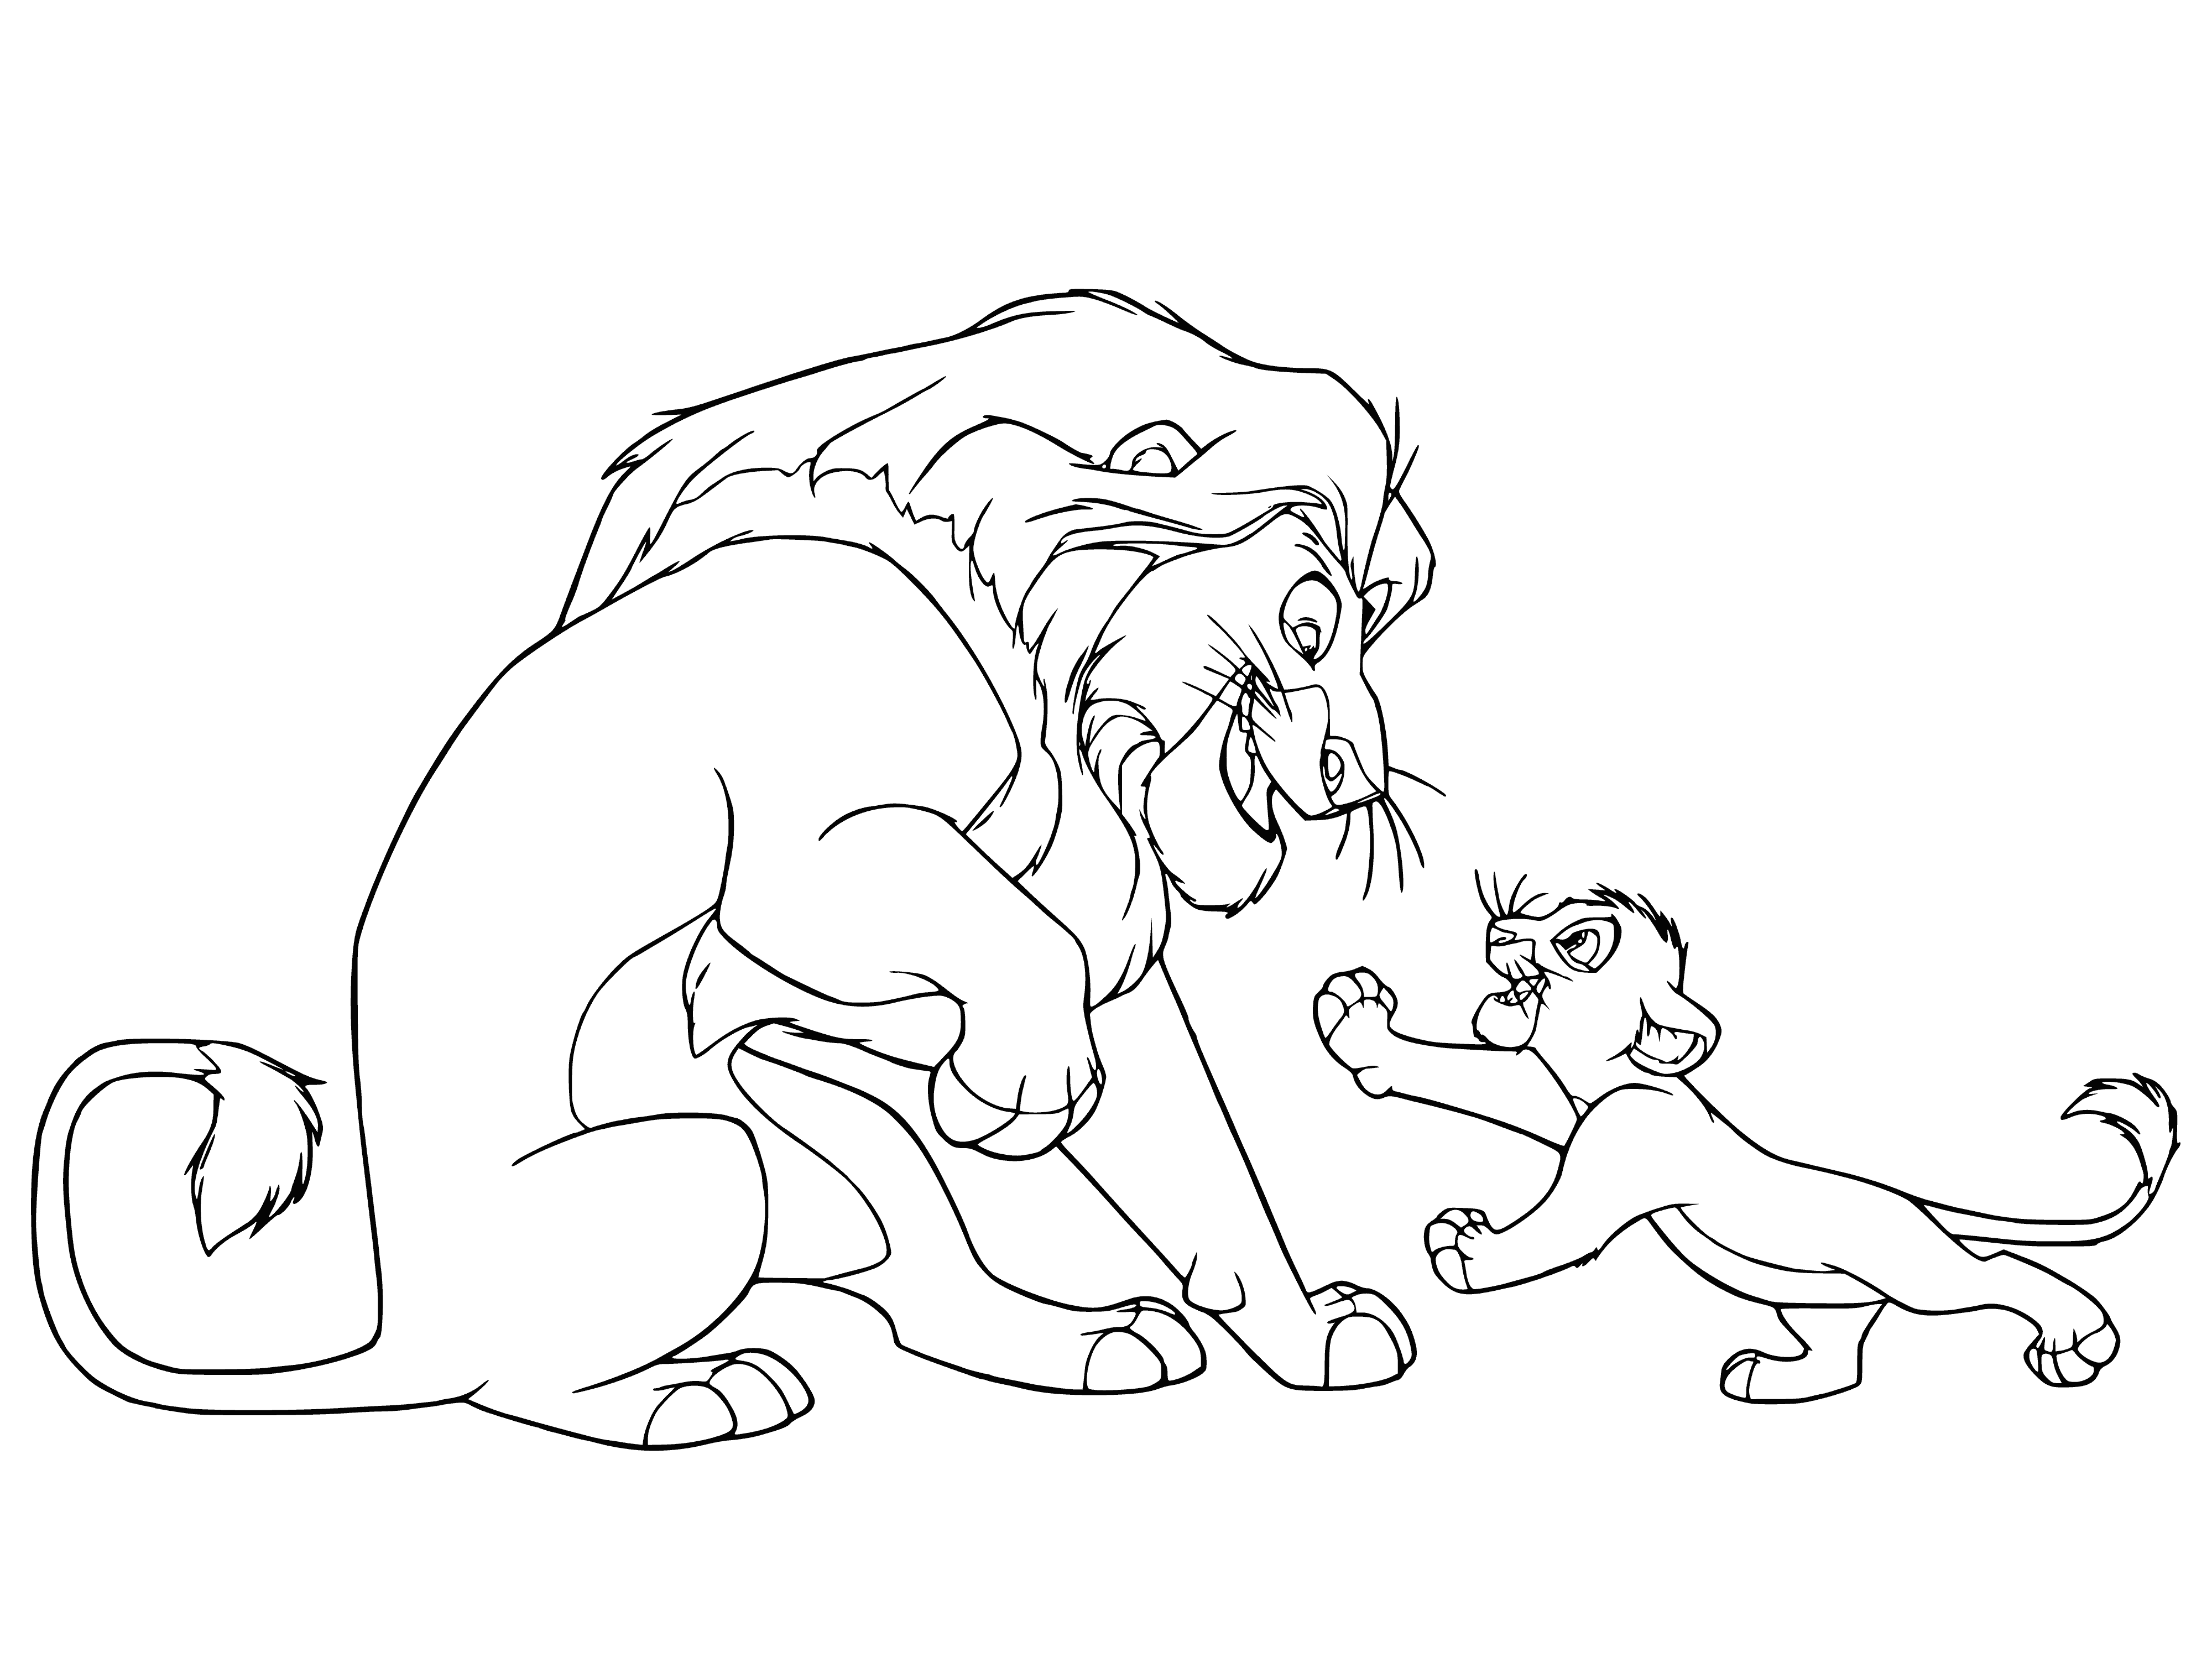 coloring page: Two lions, one large and one small, are interacting in a coloring page. Both have yellow eyes and different colored manes. #coloringpages